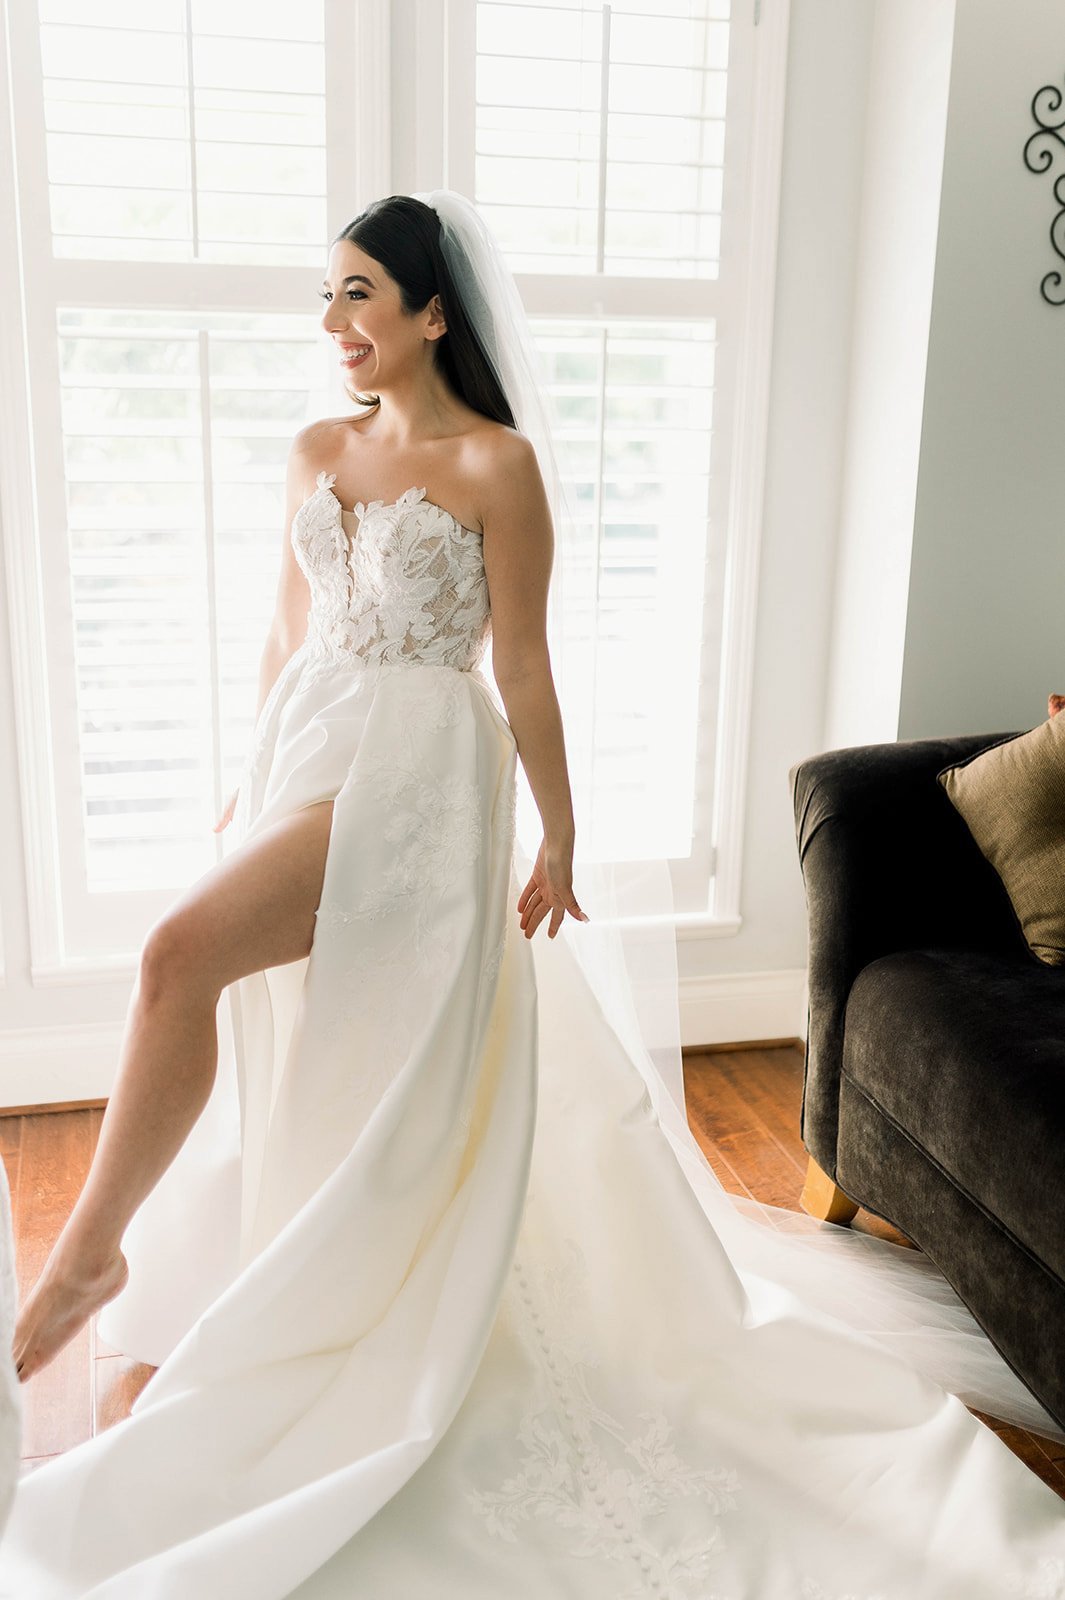 Bride poses in sexy wedding dress with leg slit as the morning light gently gleams through window. 